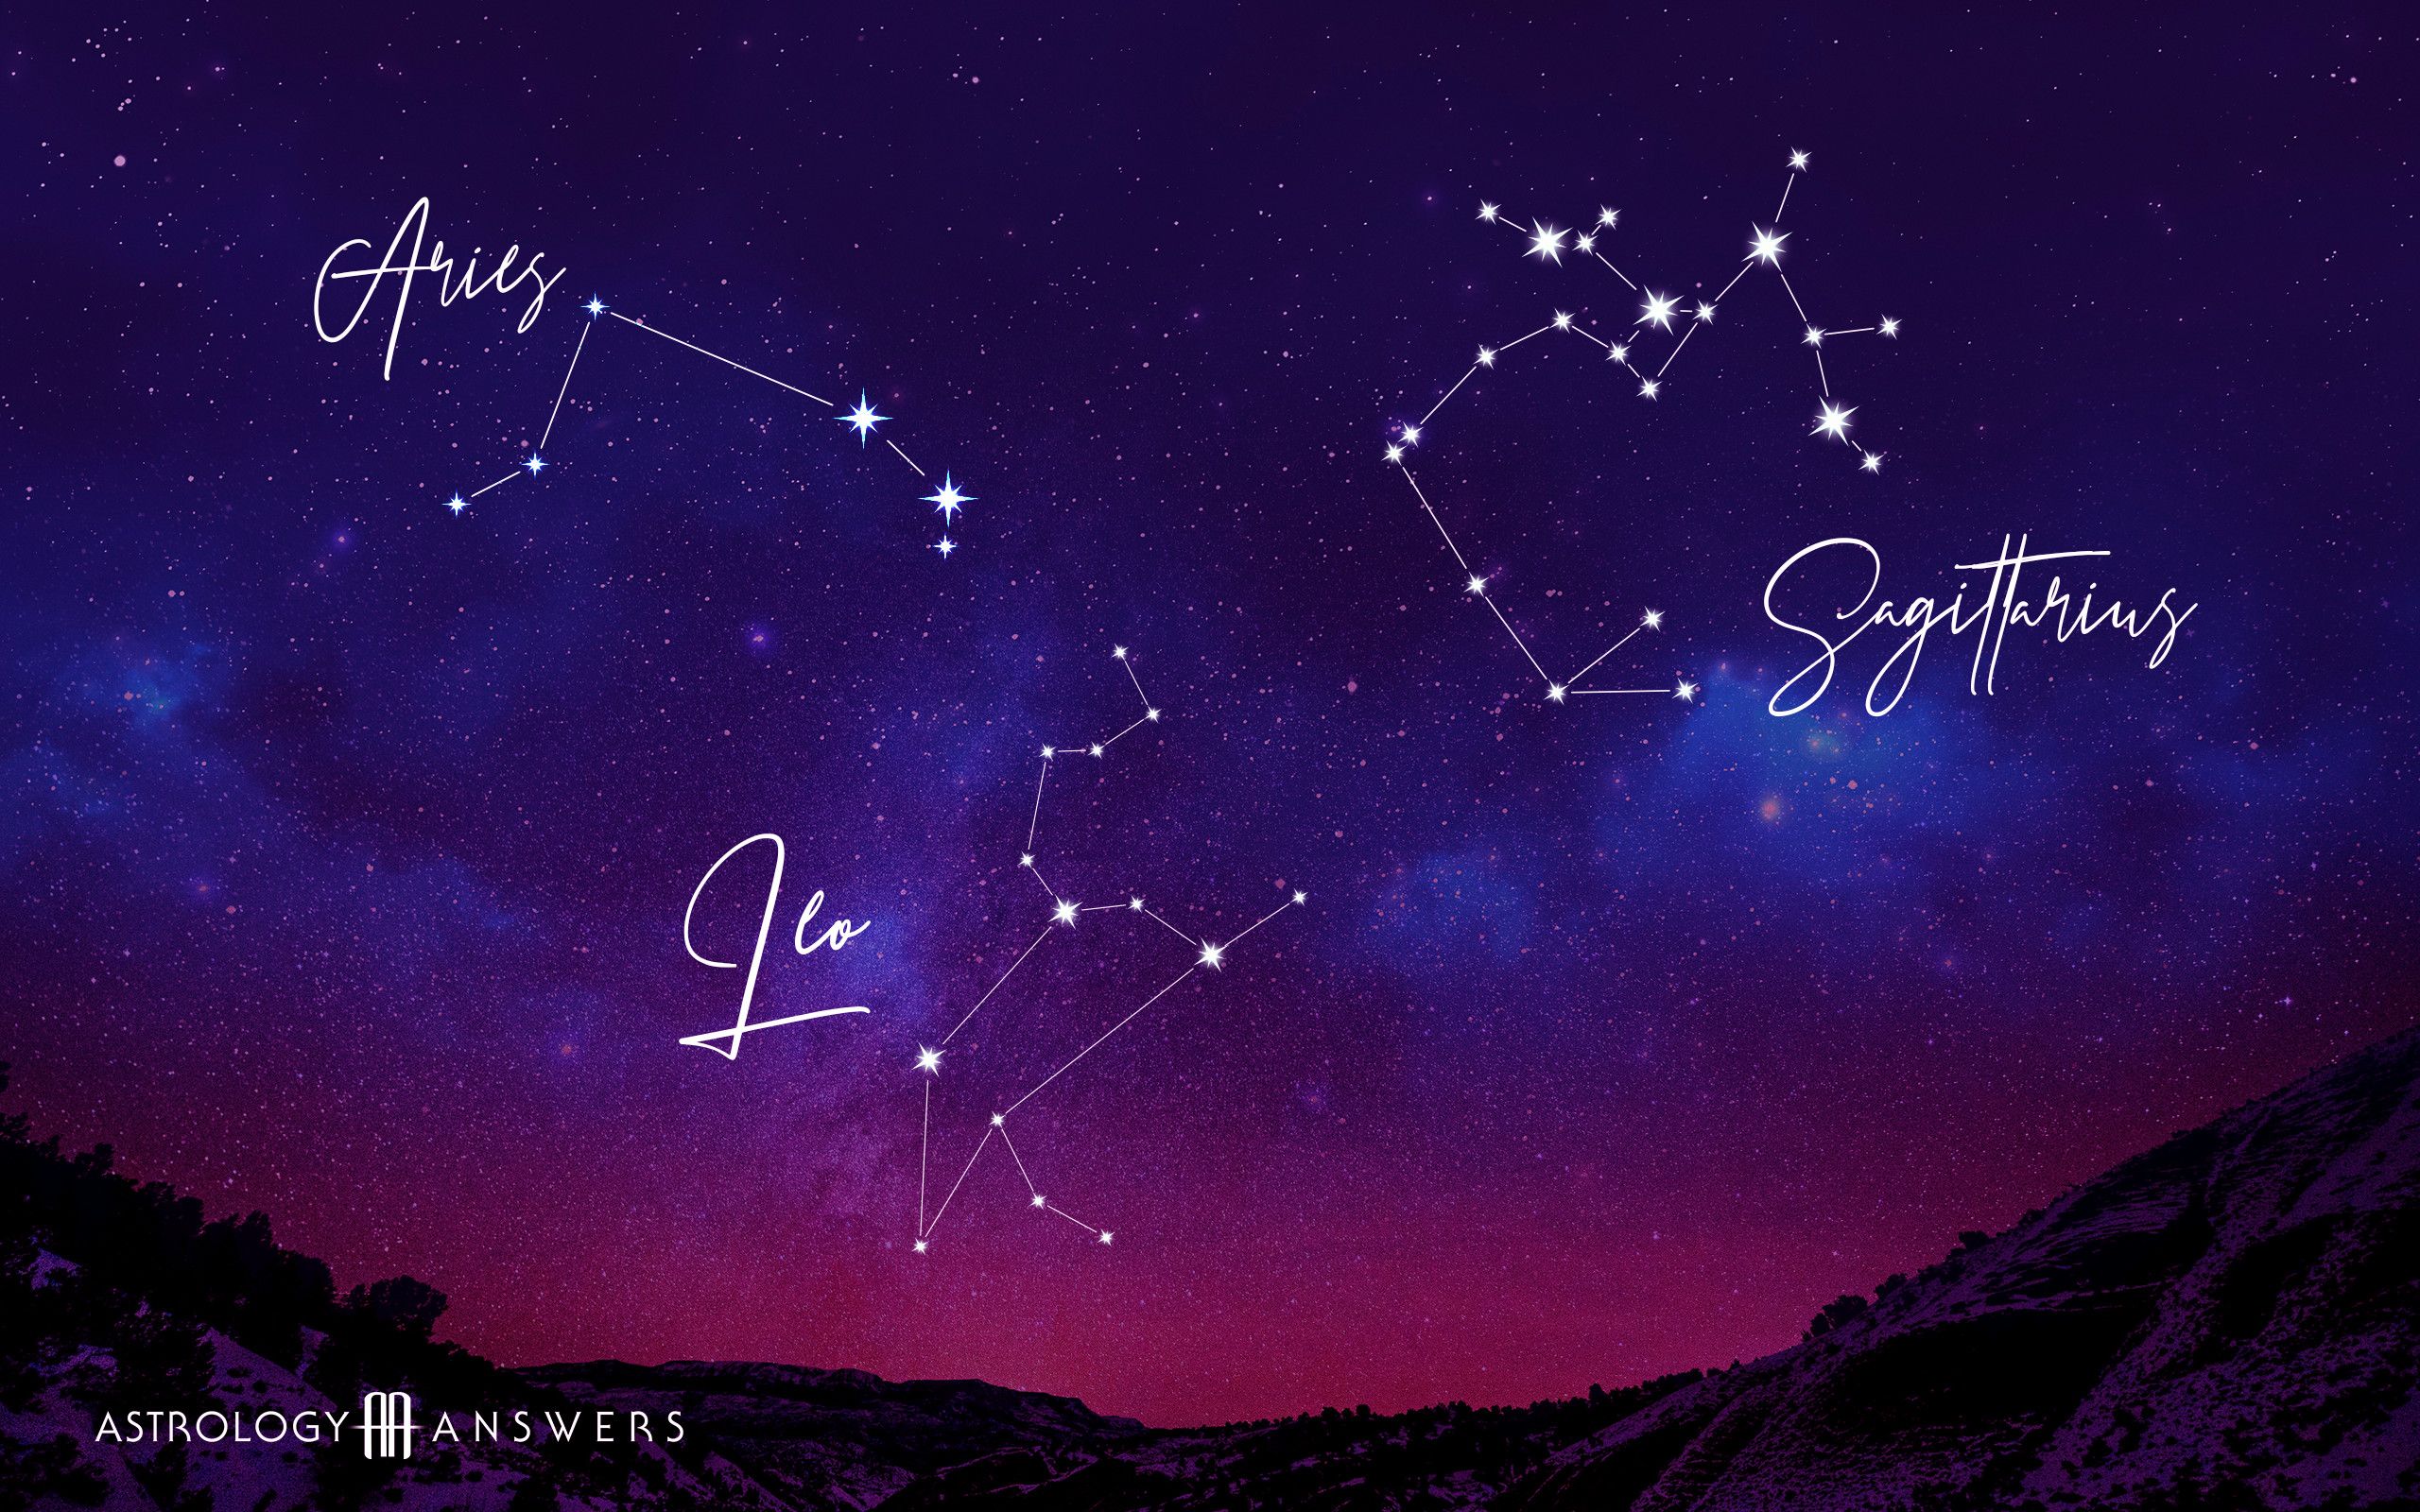 The Mythology of the Zodiac: The Fire Constellations